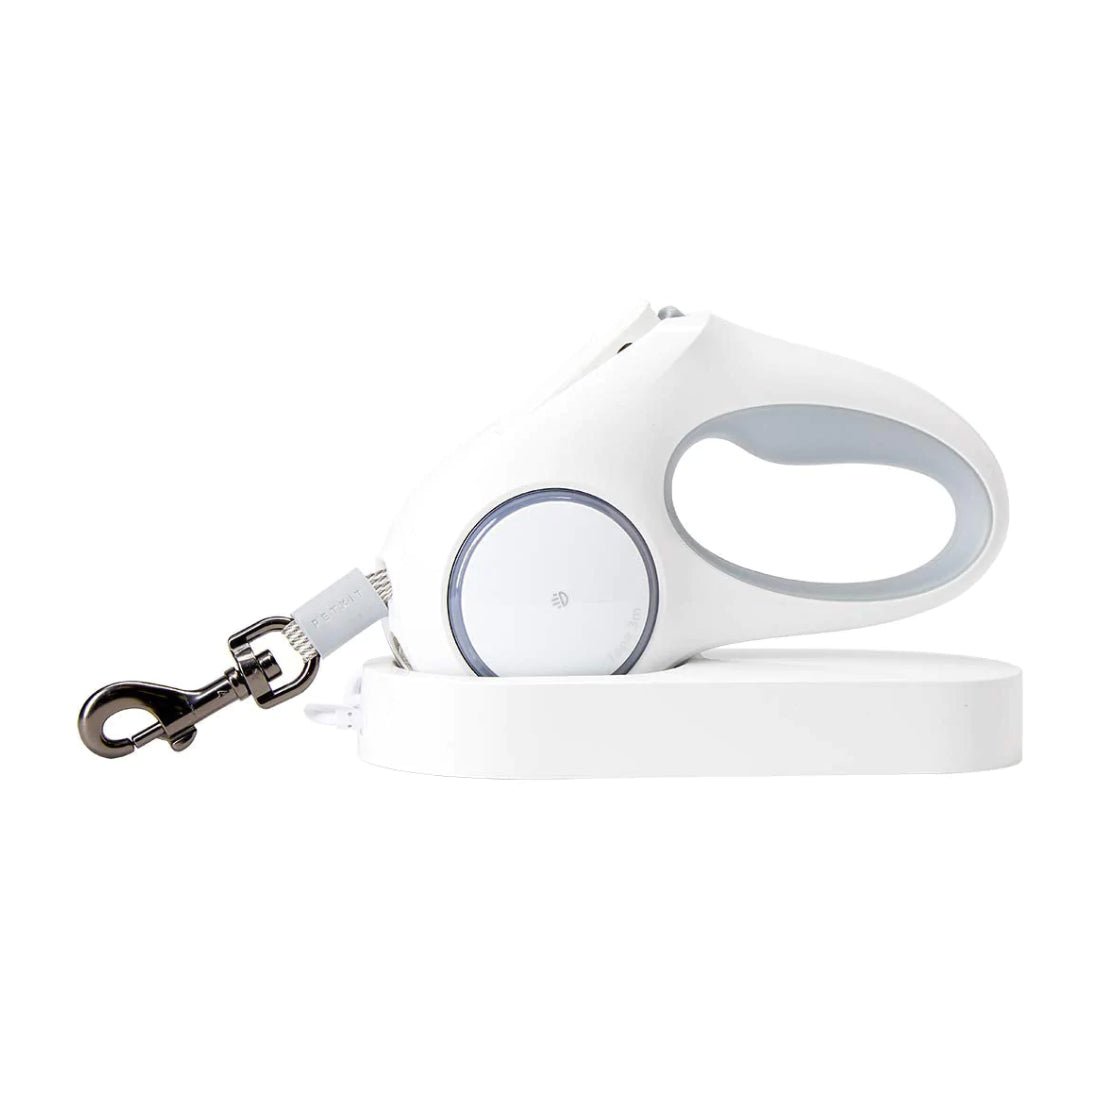 Petkit Retractable Dog Leash USB Rechargeable with RGB LED Light System - 4.5m - Store 974 | ستور ٩٧٤